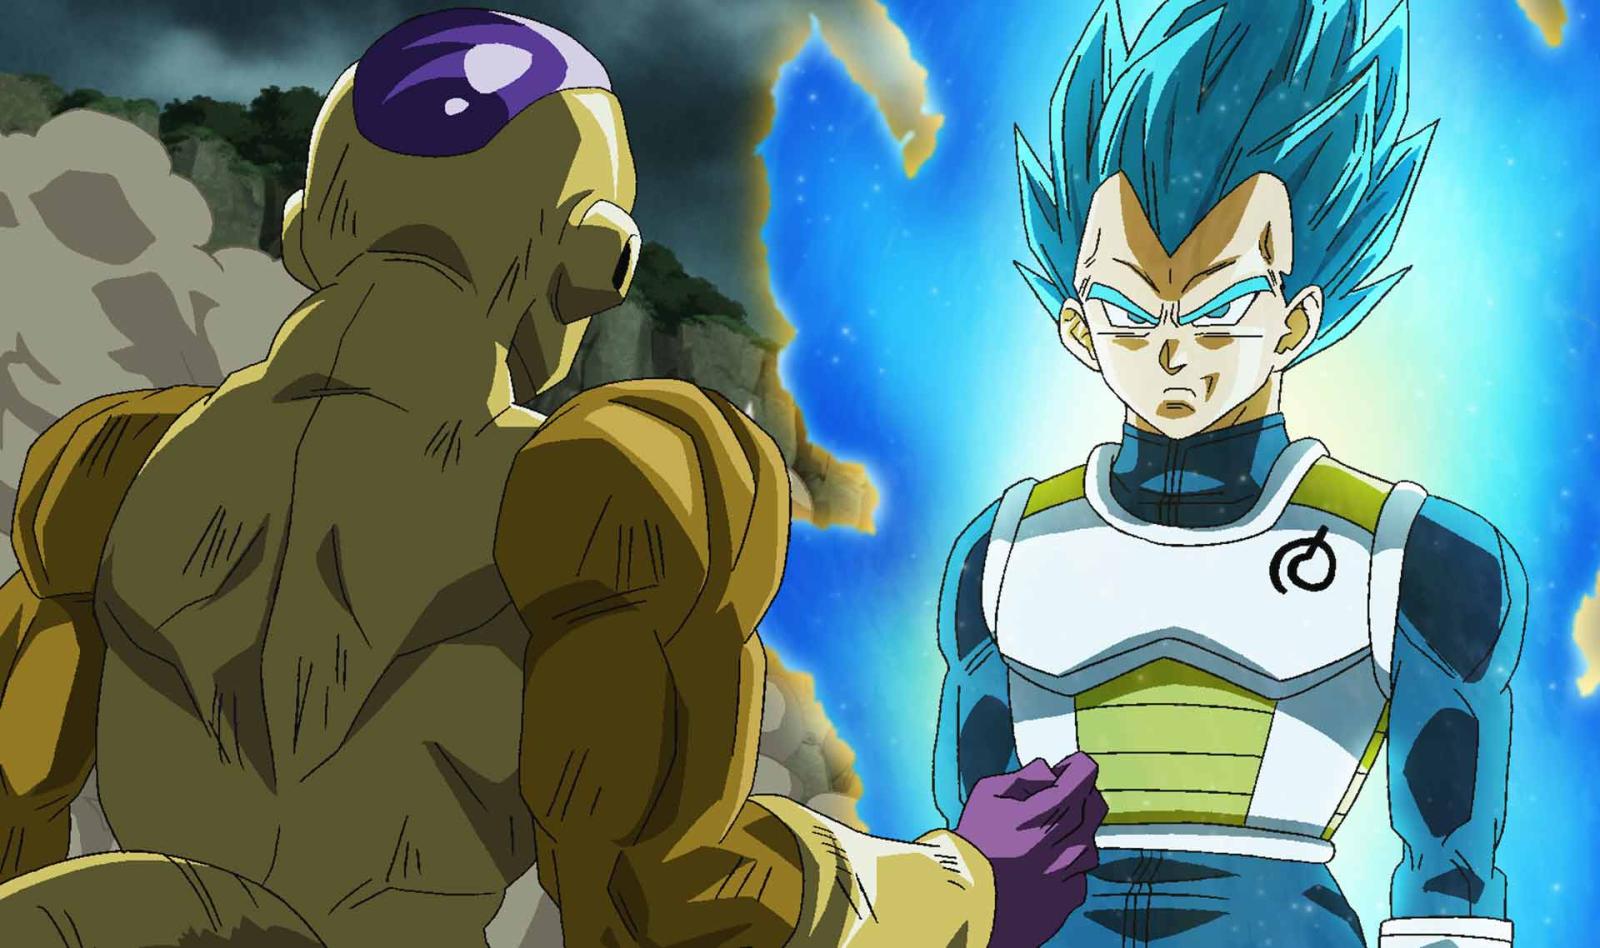 Dragon Ball Super - Volume 3 - Limited Edition 3 DVD + Card + Booklet (DVD) Image 3